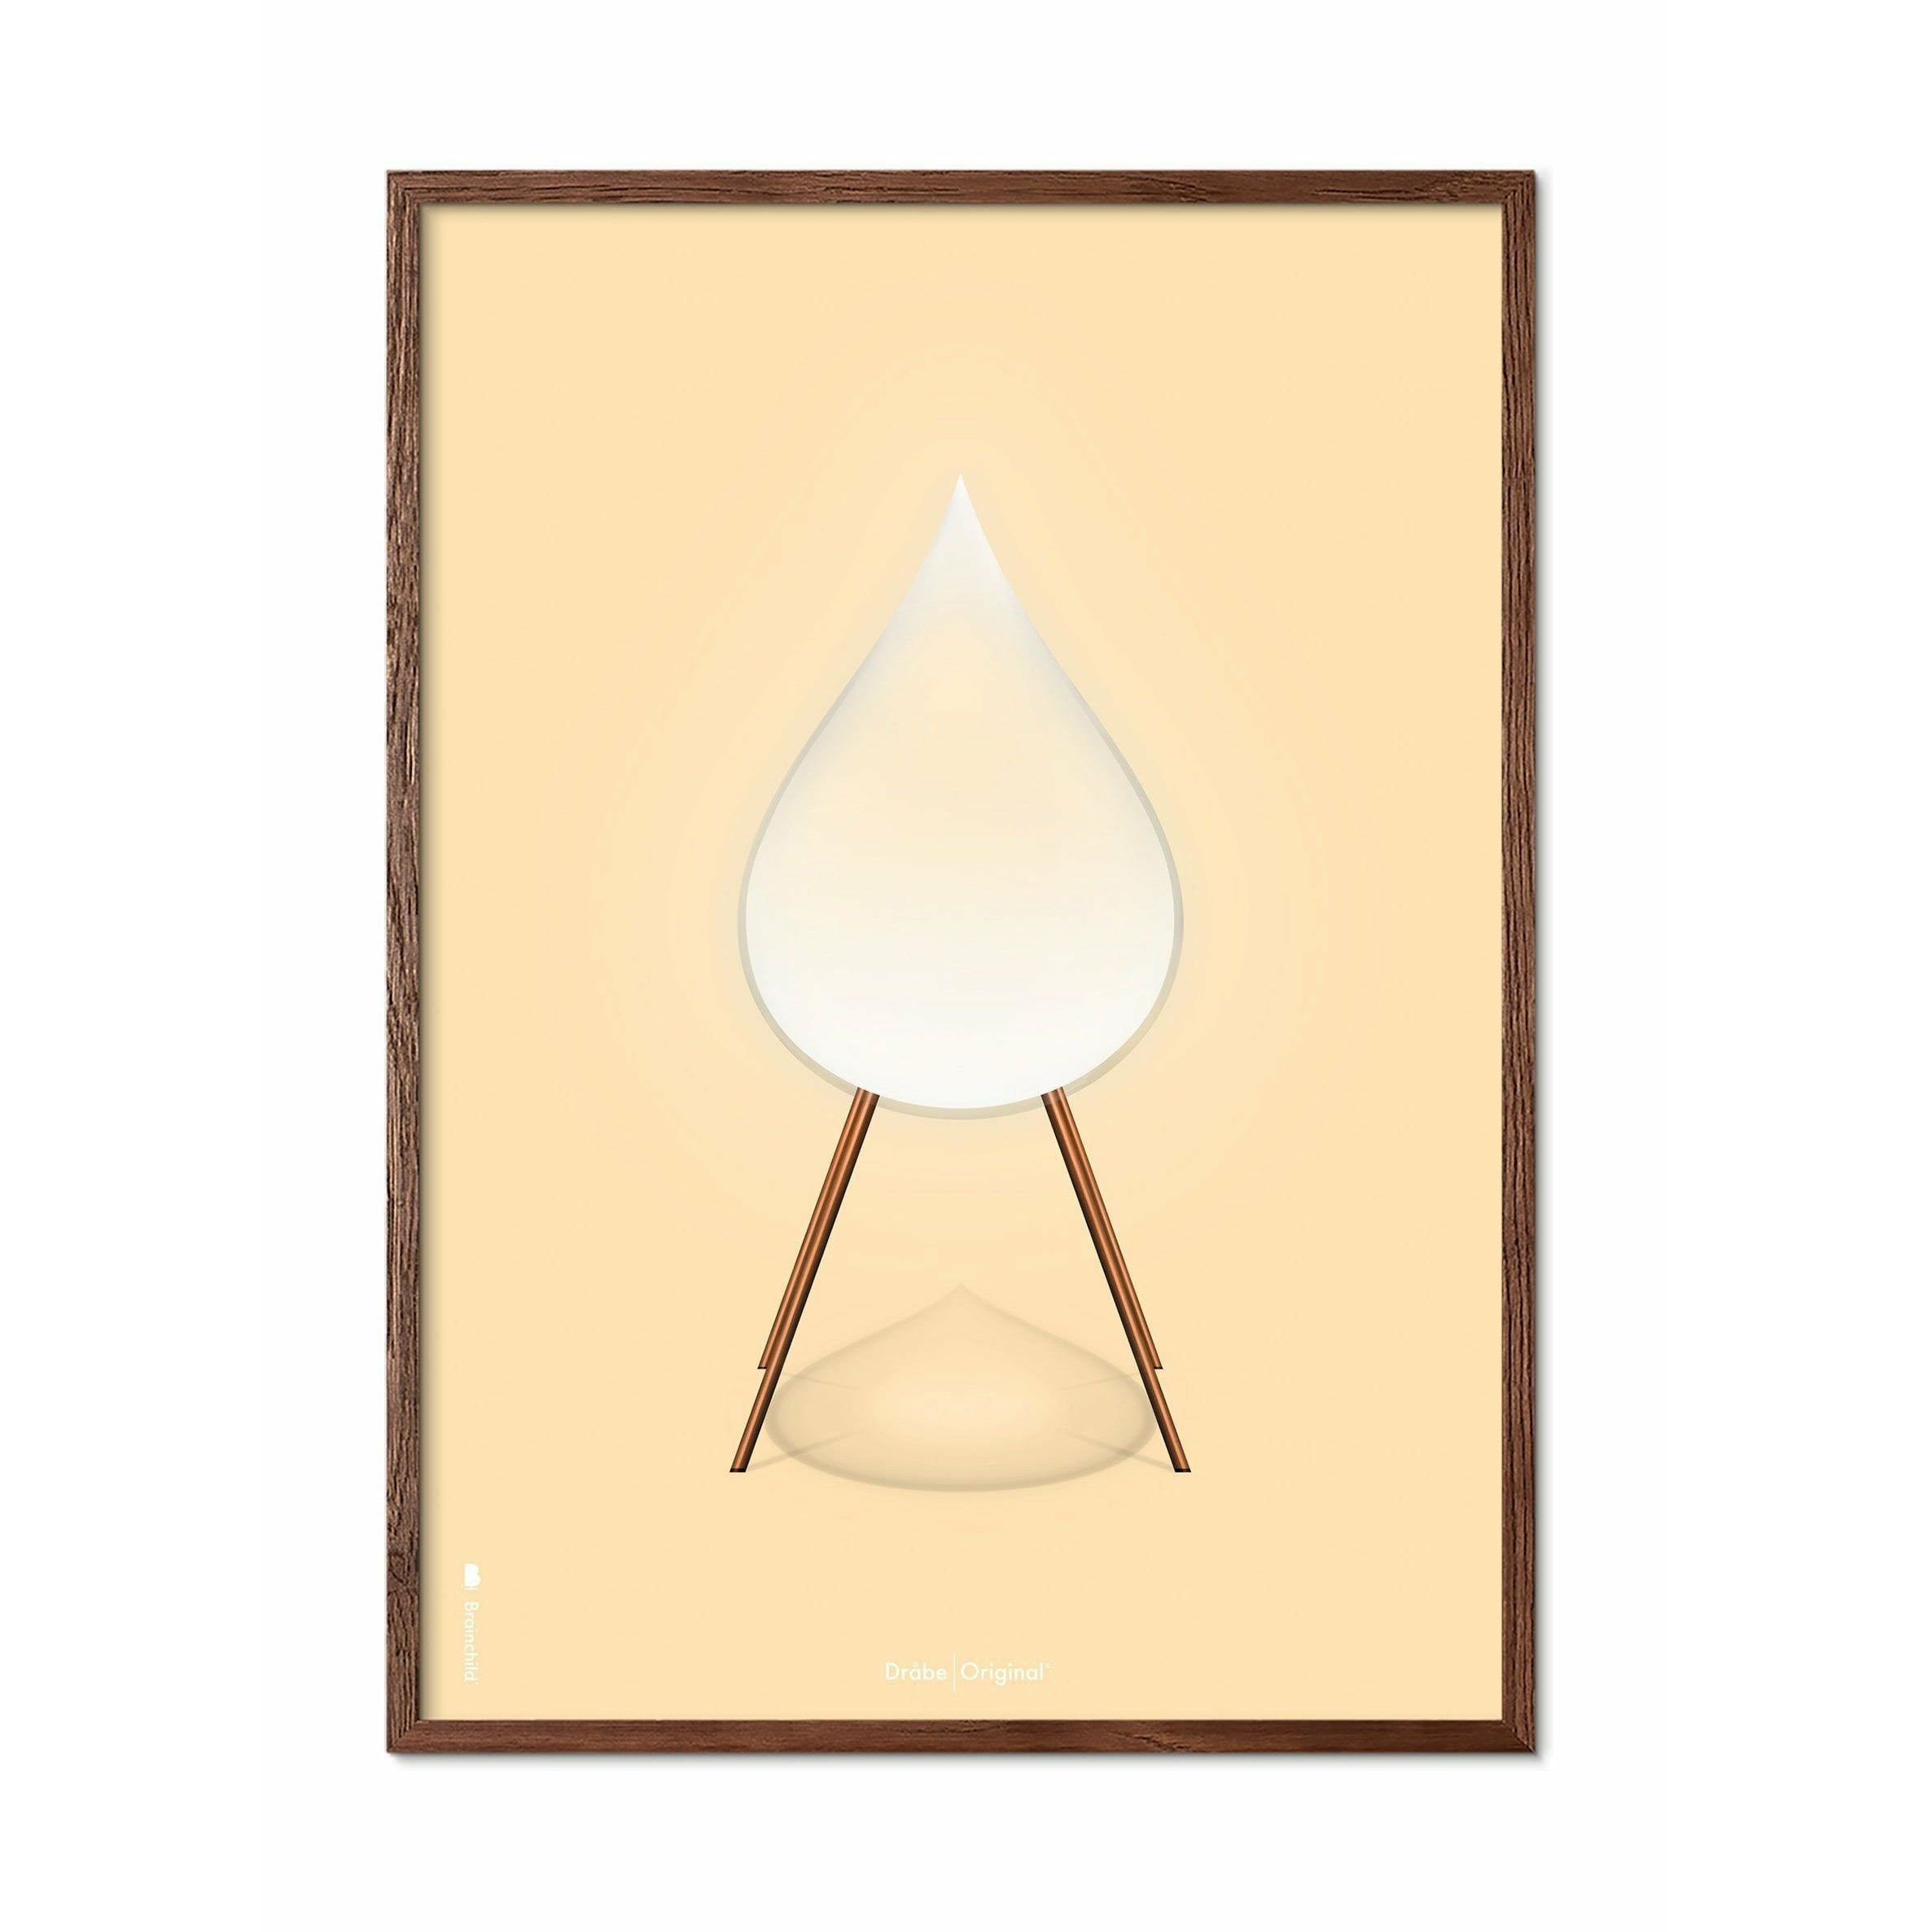 Brainchild Drop Classic Poster, Dark Wood Frame A5, Sand Colored Background